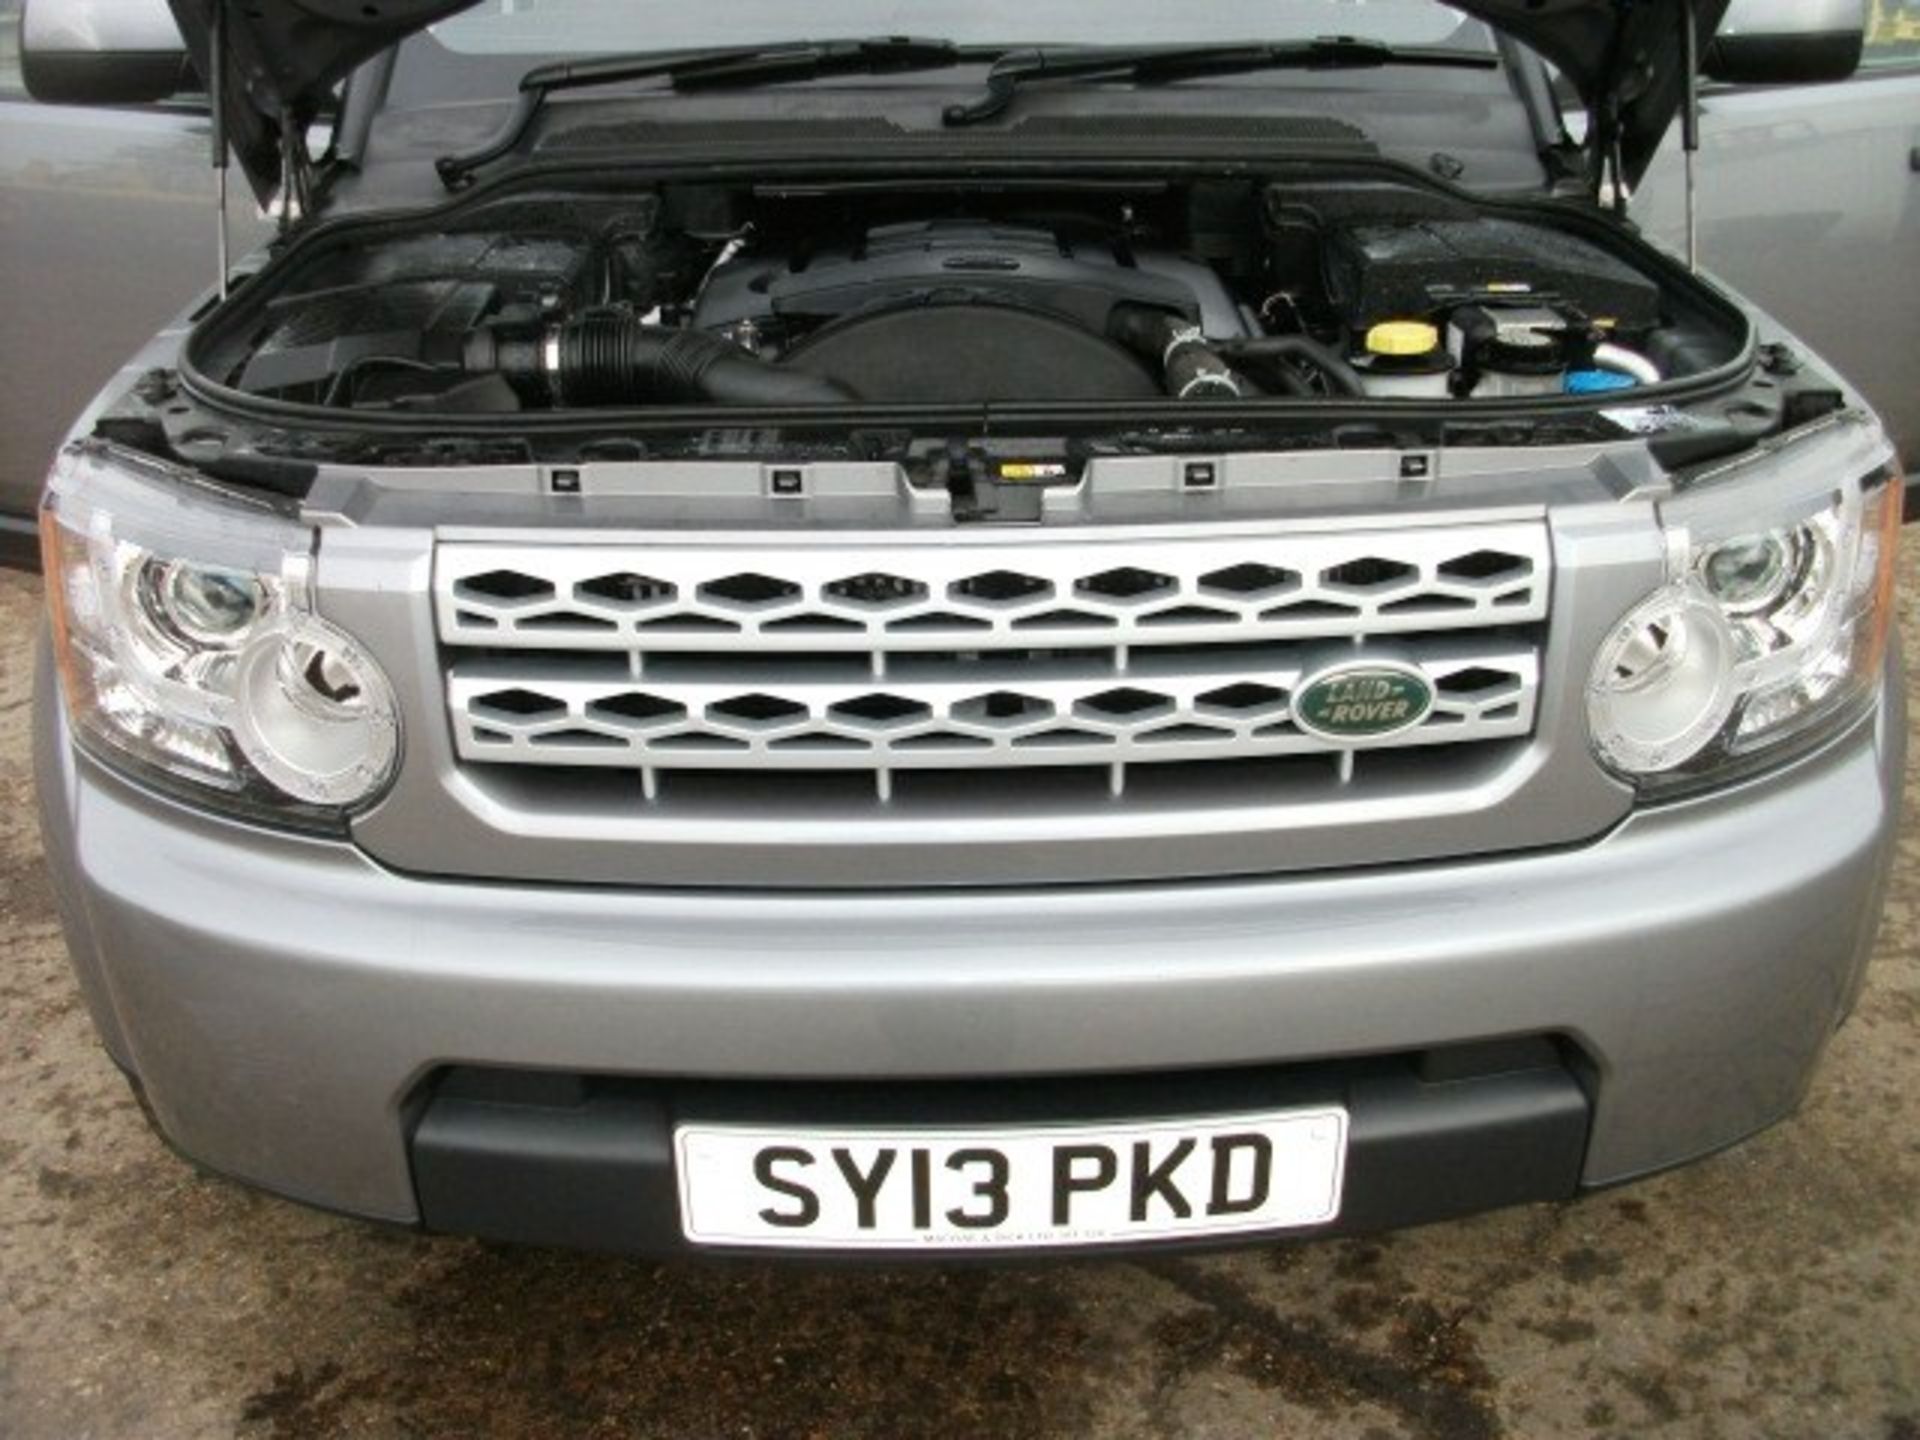 LAND ROVER DISCOVERY SDV6 AUTO 255 - 2993cc
Body: 4 Dr 4x4
Color: Grey
First Reg: 26/04/2013 - Image 15 of 29